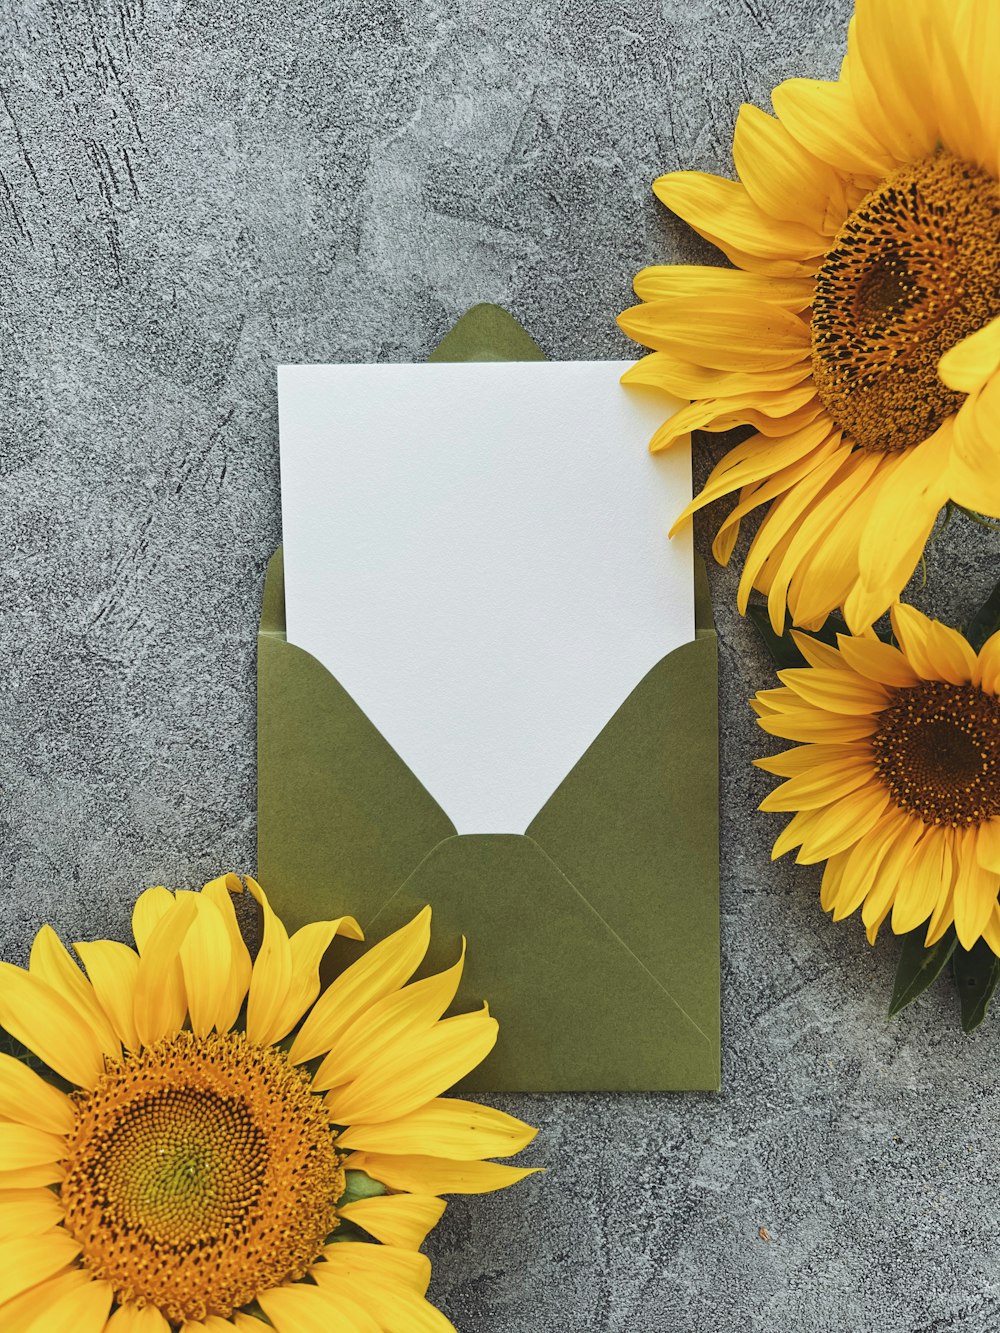 sunflowers and an envelope on a concrete surface